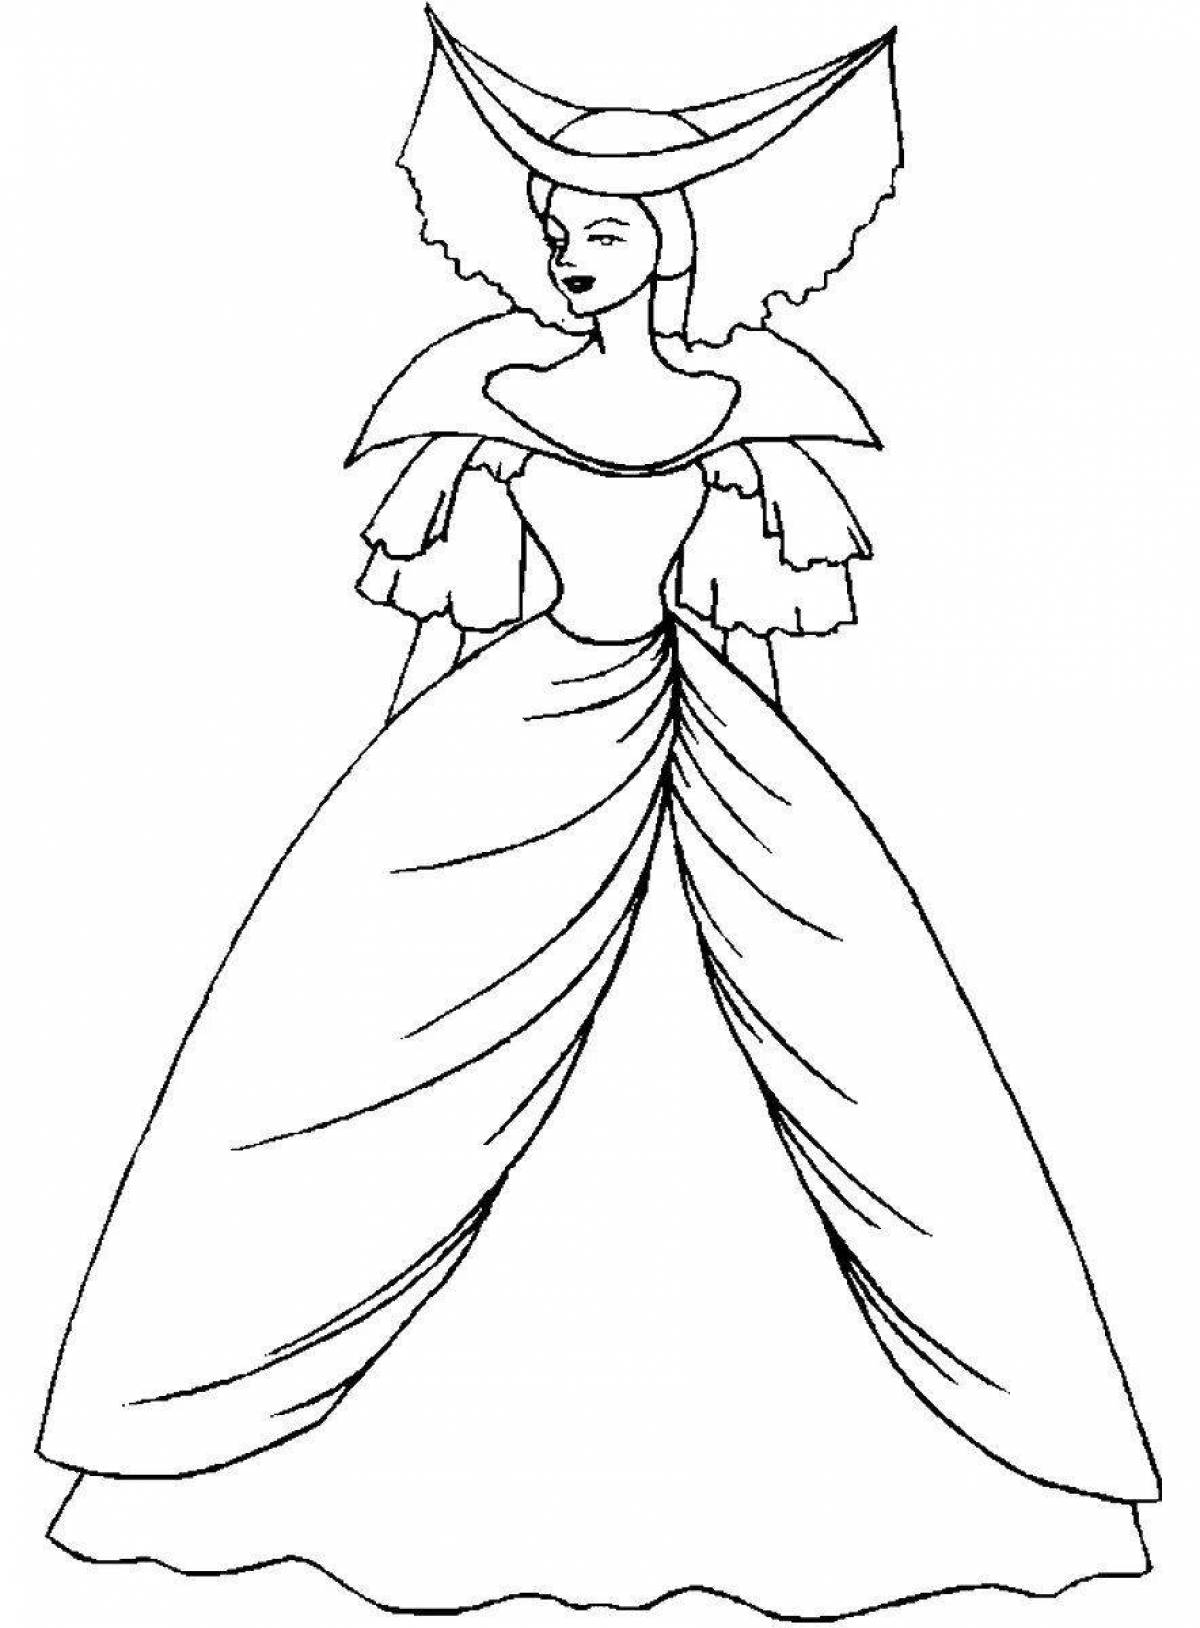 Coloring page charming theatrical costume